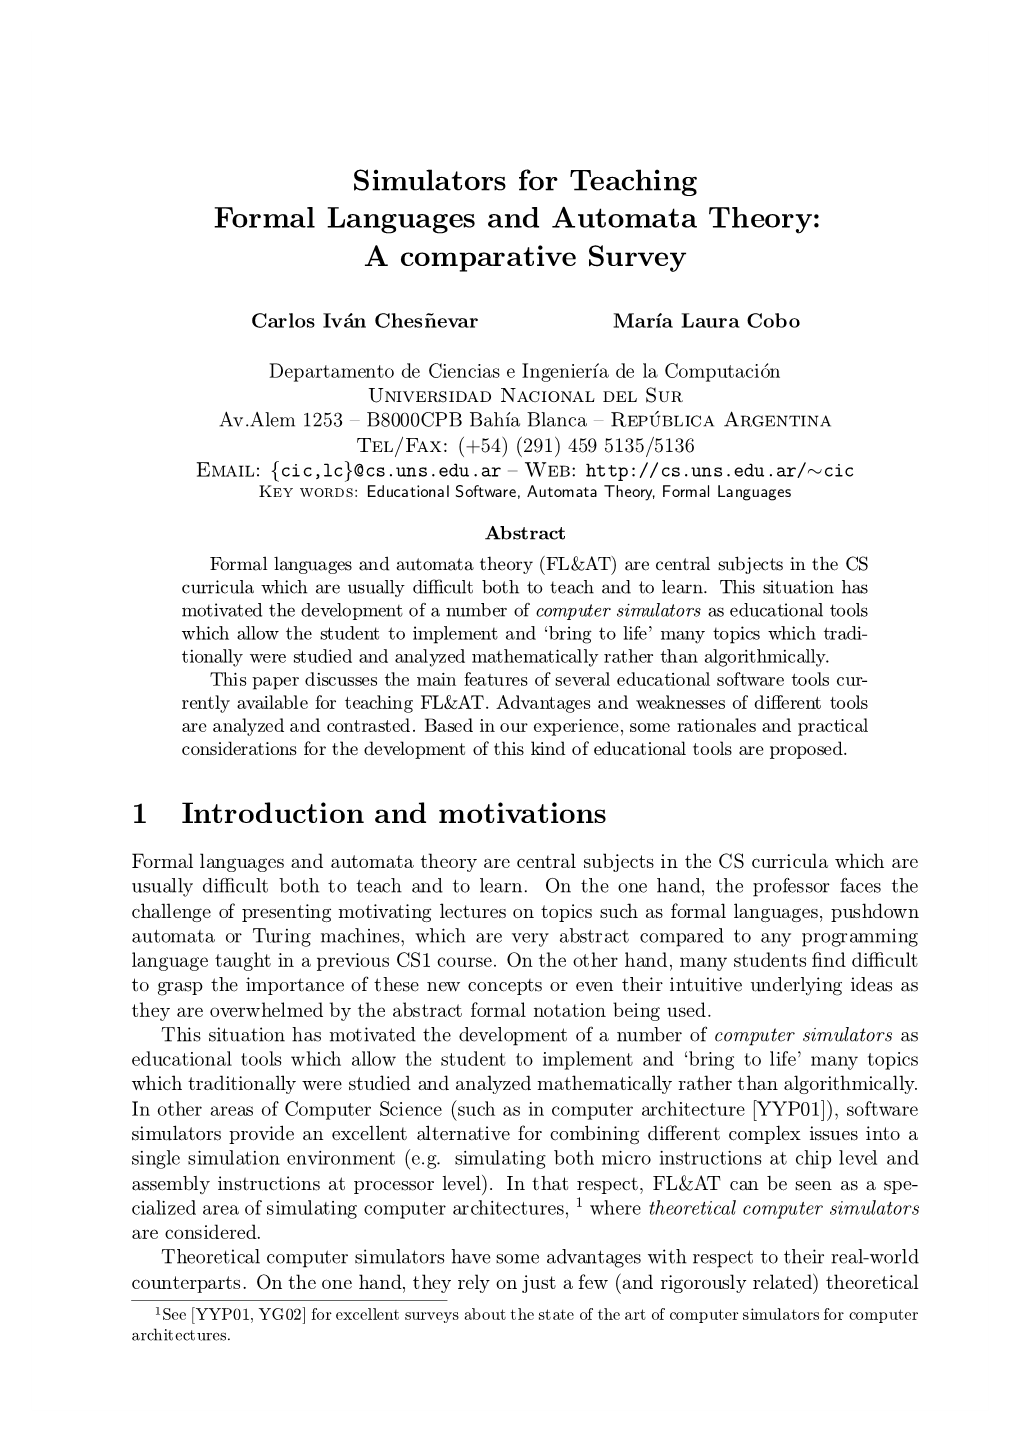 Simulators for Teaching Formal Languages and Automata Theory: a Comparative Survey